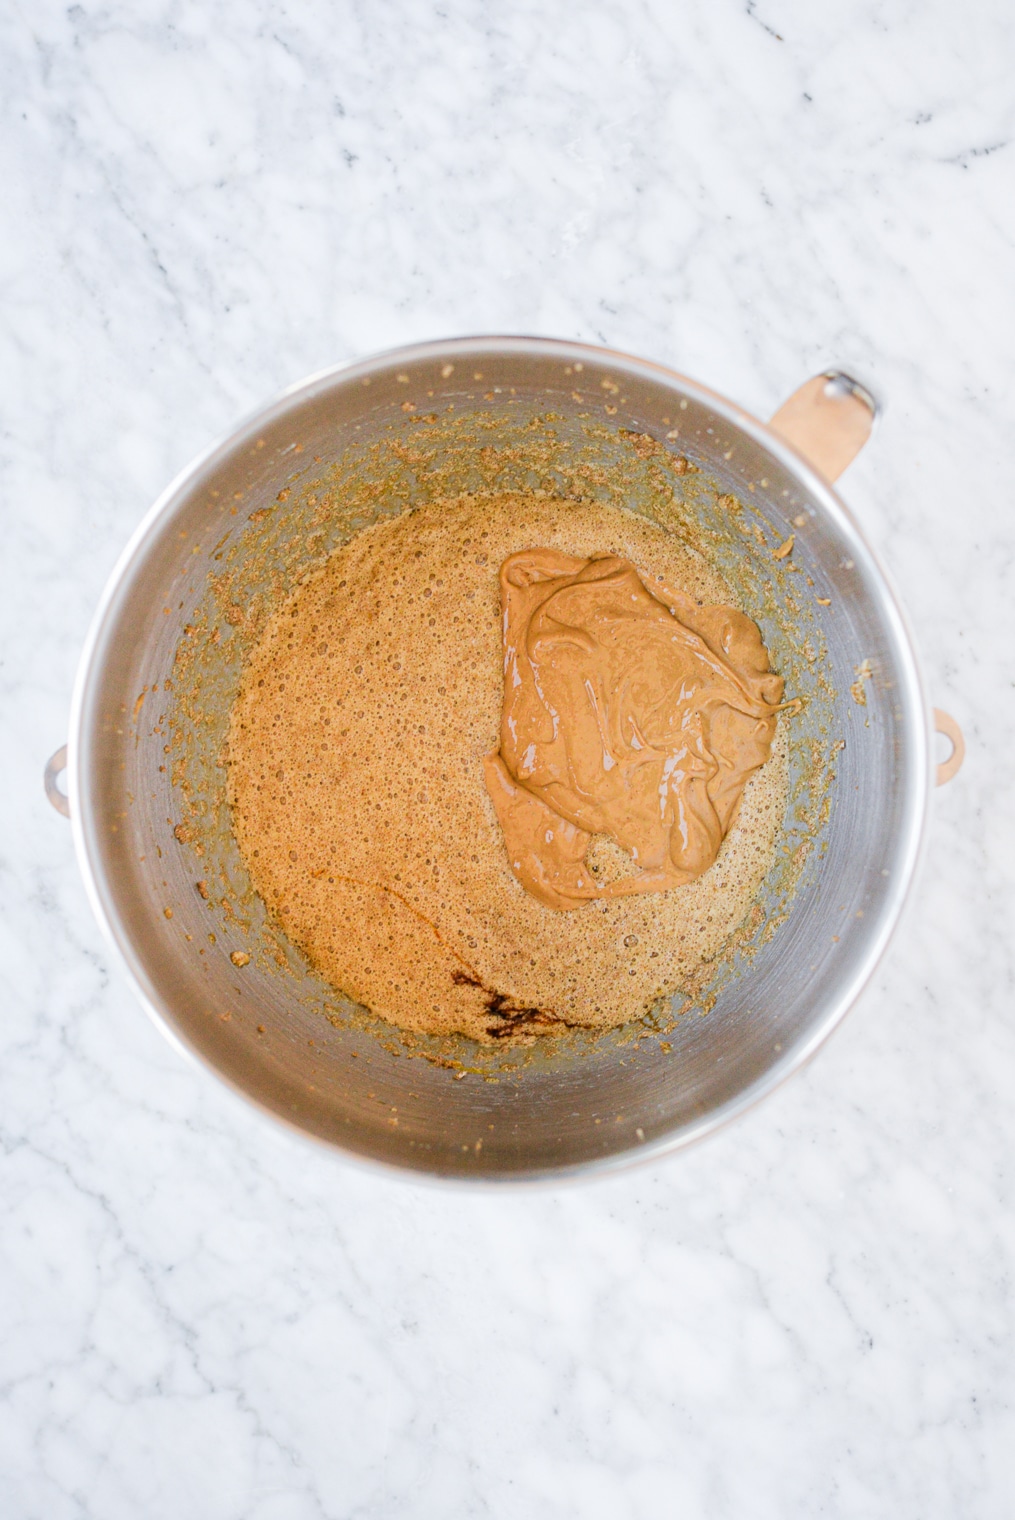 cashew butter being mixed into wet ingredients for ginger molasses cookies in a stainless steel bowl on a marble surface